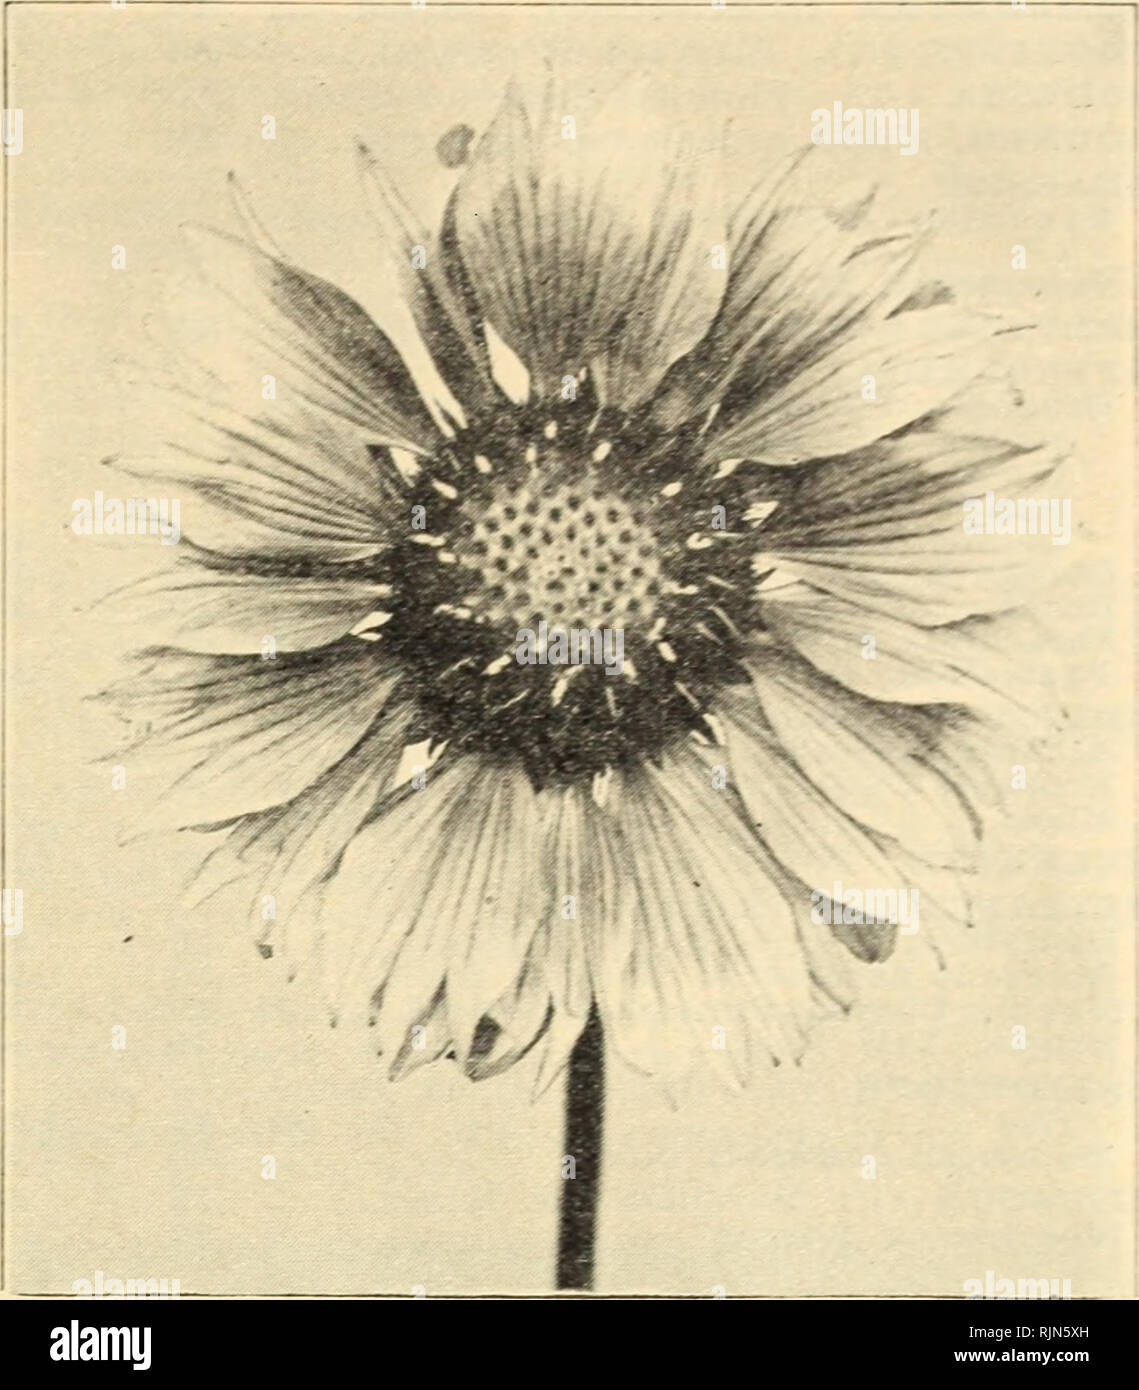 . Barnard's florists' price list : spring 1929. Seeds Catalogs; Flowers Seeds Catalogs; Nurseries (Horticulture) Catalogs; Gardening Equipment and supplies Catalogs. Gaillarclia Grandiflora, &quot;Dazzler.&quot; T. Pkt. DIANTHUS. Hardy Perennial Pinks. Plumarius, Double White SO.35 Plumarius. Single (Pheasant's Ey^i .15 20 50 .15 .20 .25 .10 Plumarius, Double. Mixed Dianthus Allwoodi Dianthus Latifolius Atrococcineus DICTAMNUS. (P). (Gas Plant)  .. Dictamnus, Red, -VI bus. each DIDISCUS COERULEUS. Lavender Lace Flower (A). Has long stems, useful for cutting. Sow seed where plants are to bloom  Stock Photo